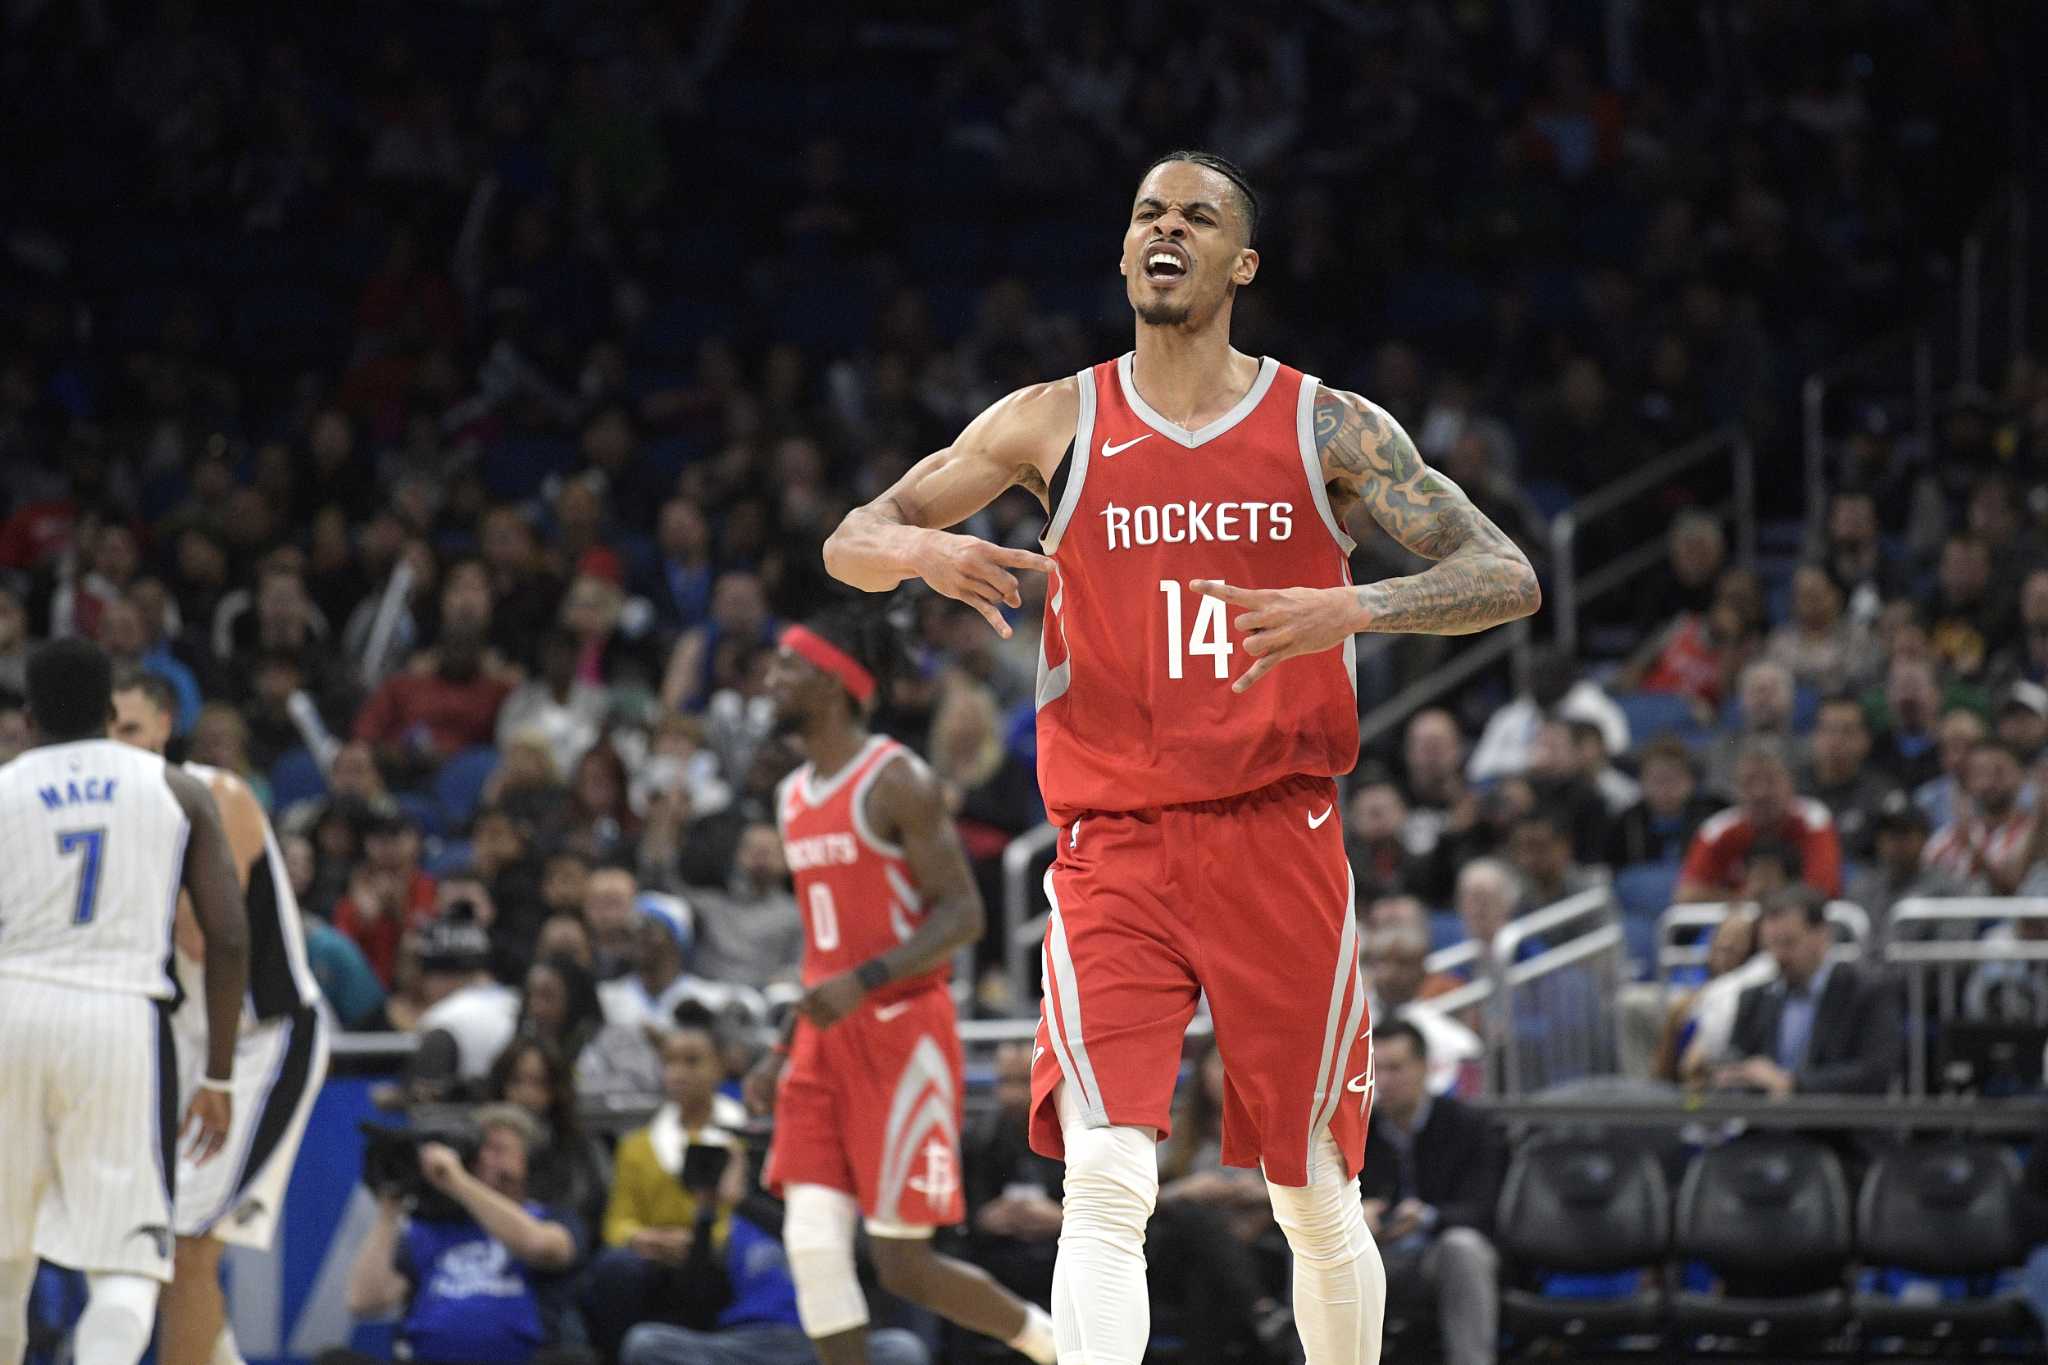 Rockets breeze past Magic in first outing without James Harden